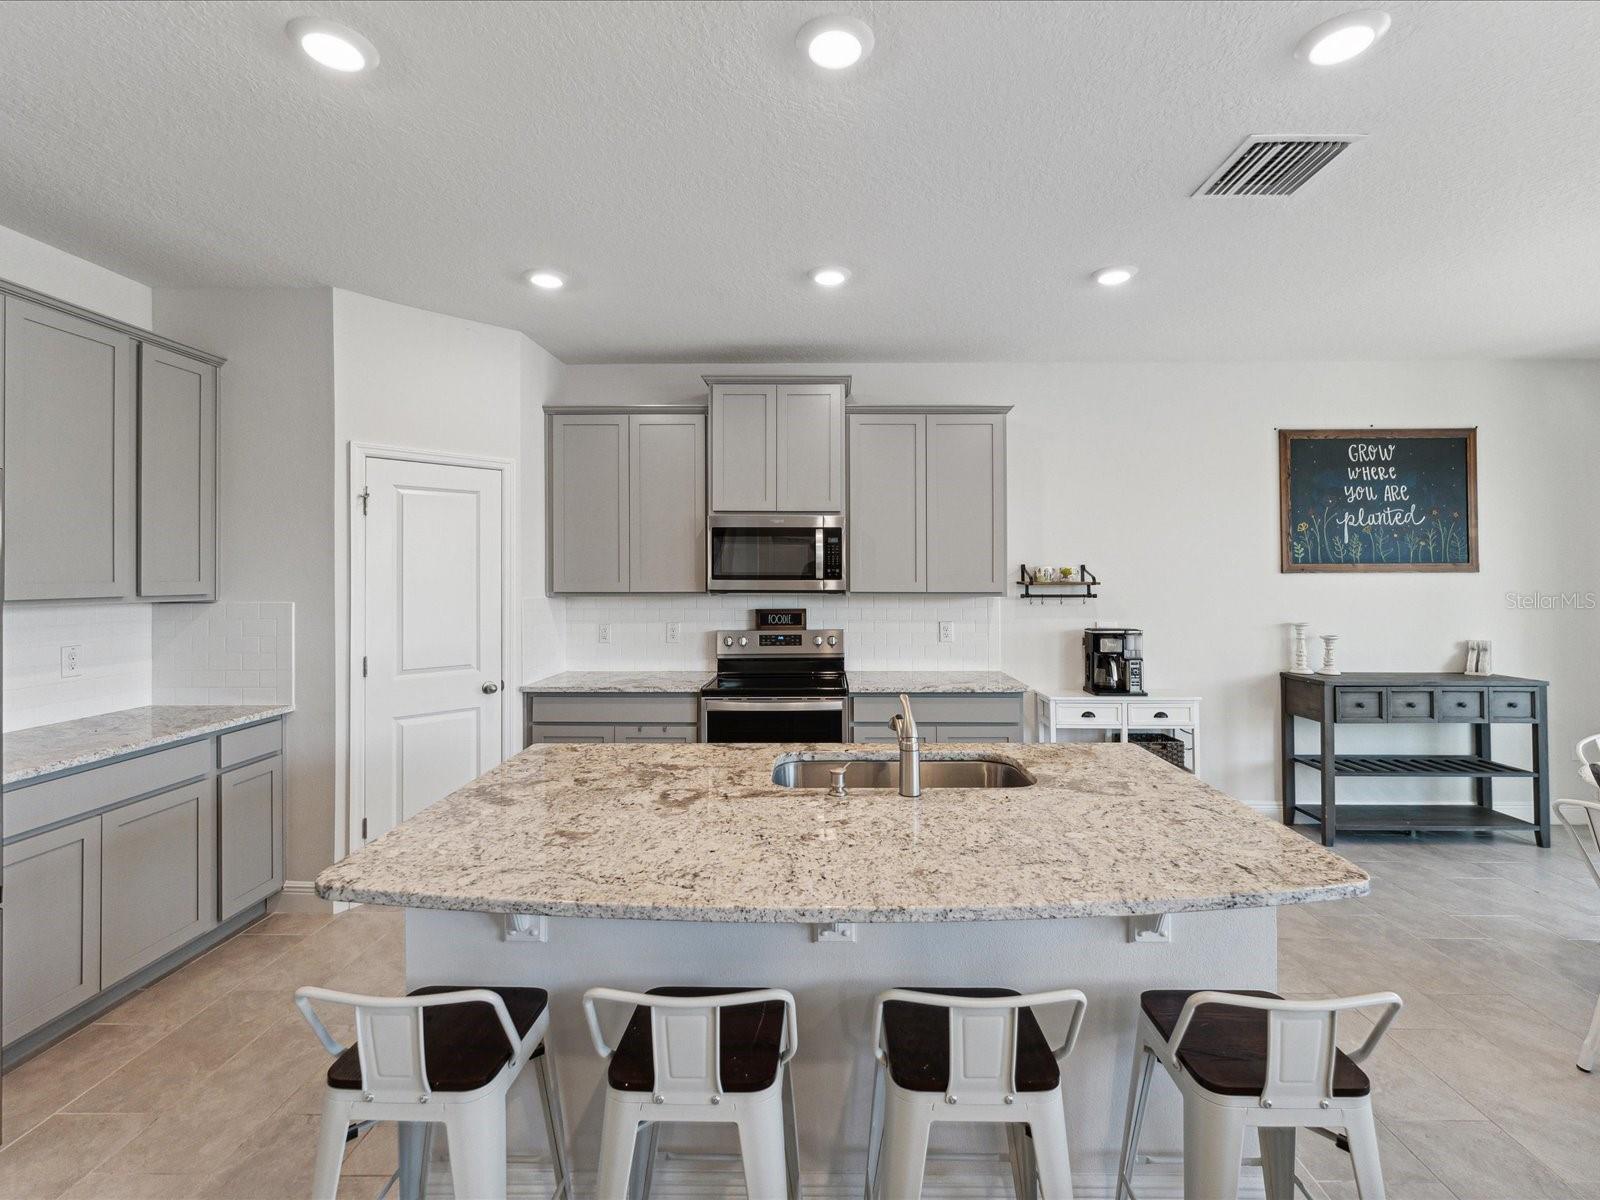 The kitchen island has space to serve and eat for easy entertaining.